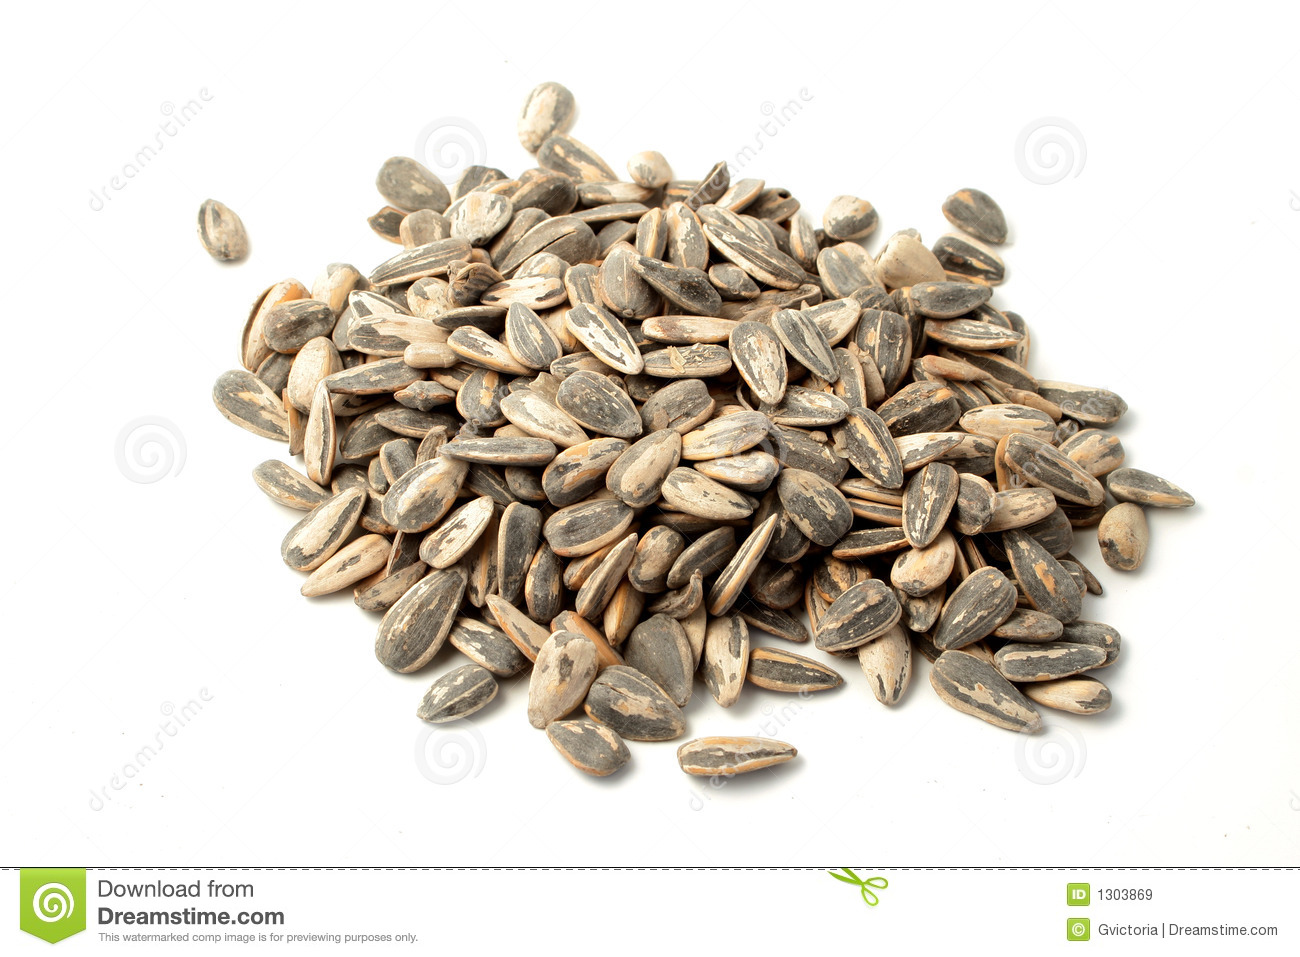 Sunflower Seeds Royalty Free Stock Images   Image  1303869